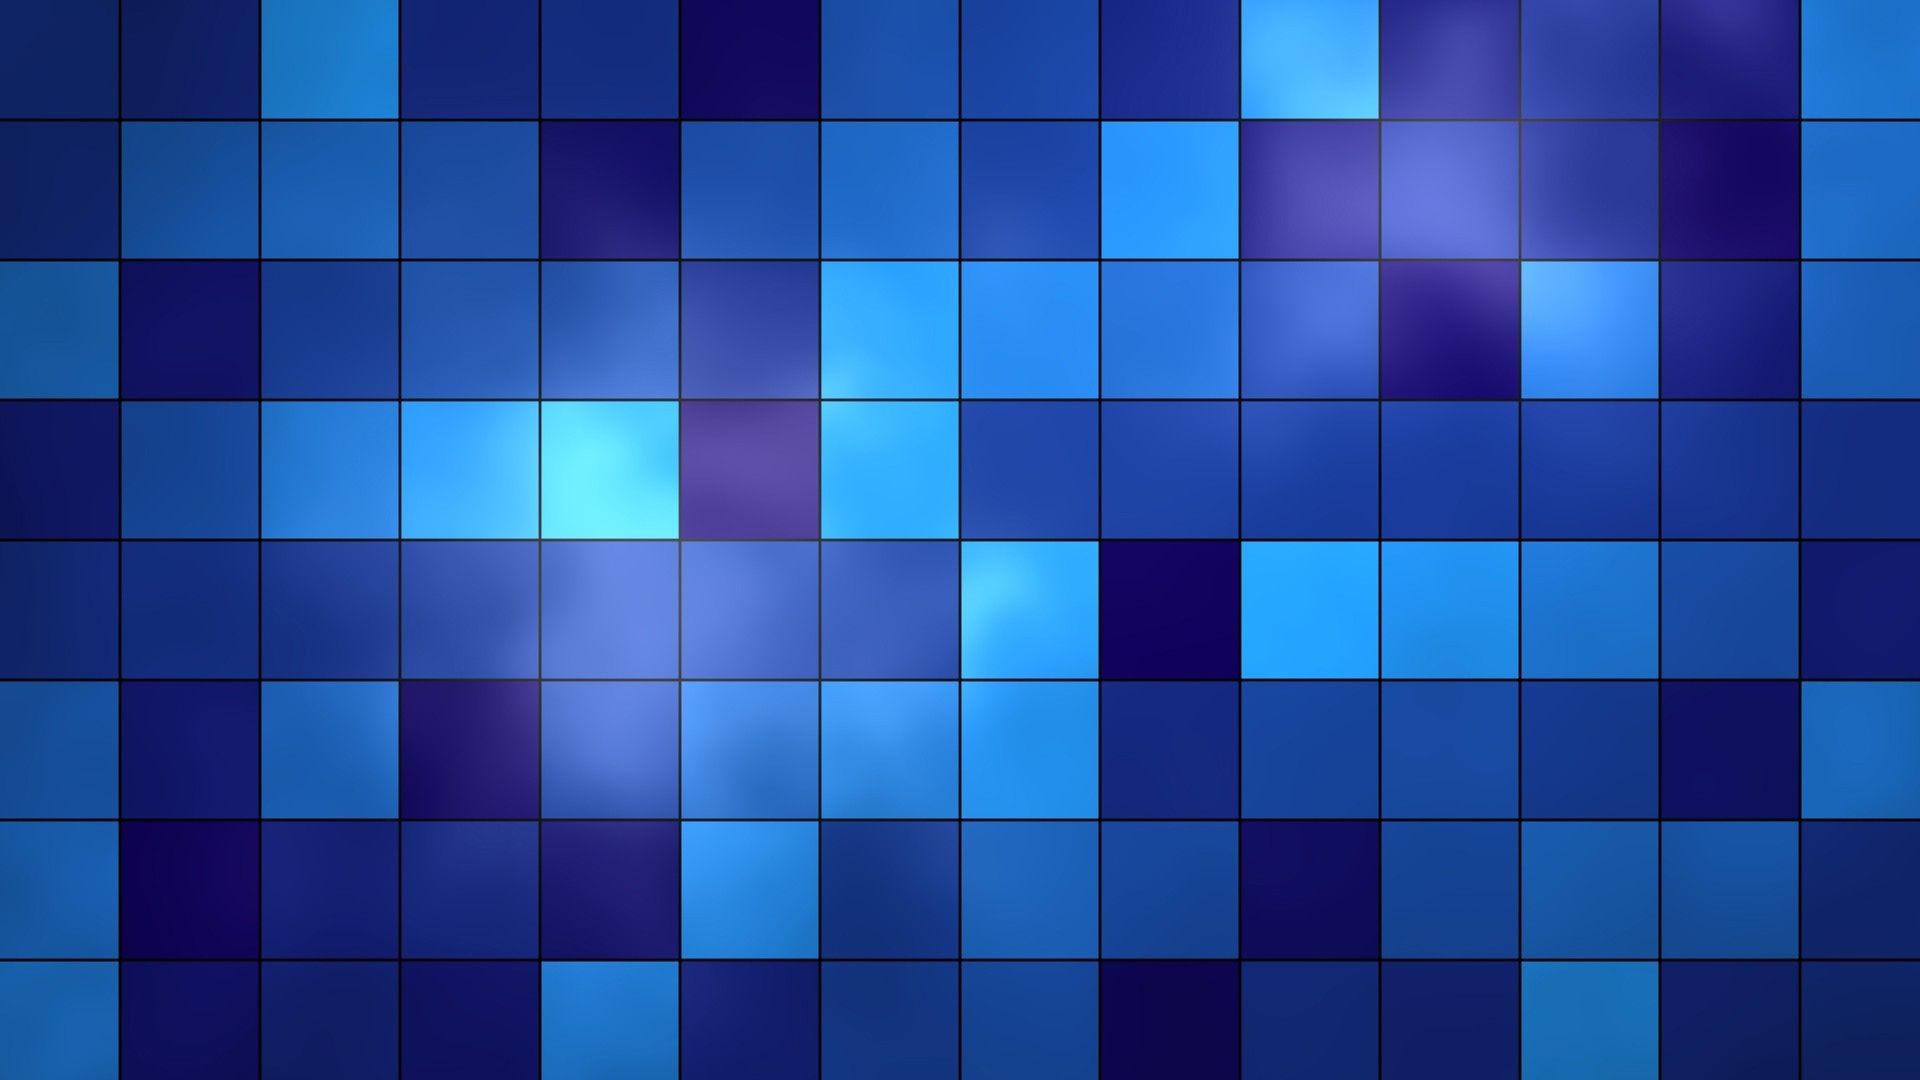 1920x1080 Blue background images hd wallpaper of 3d